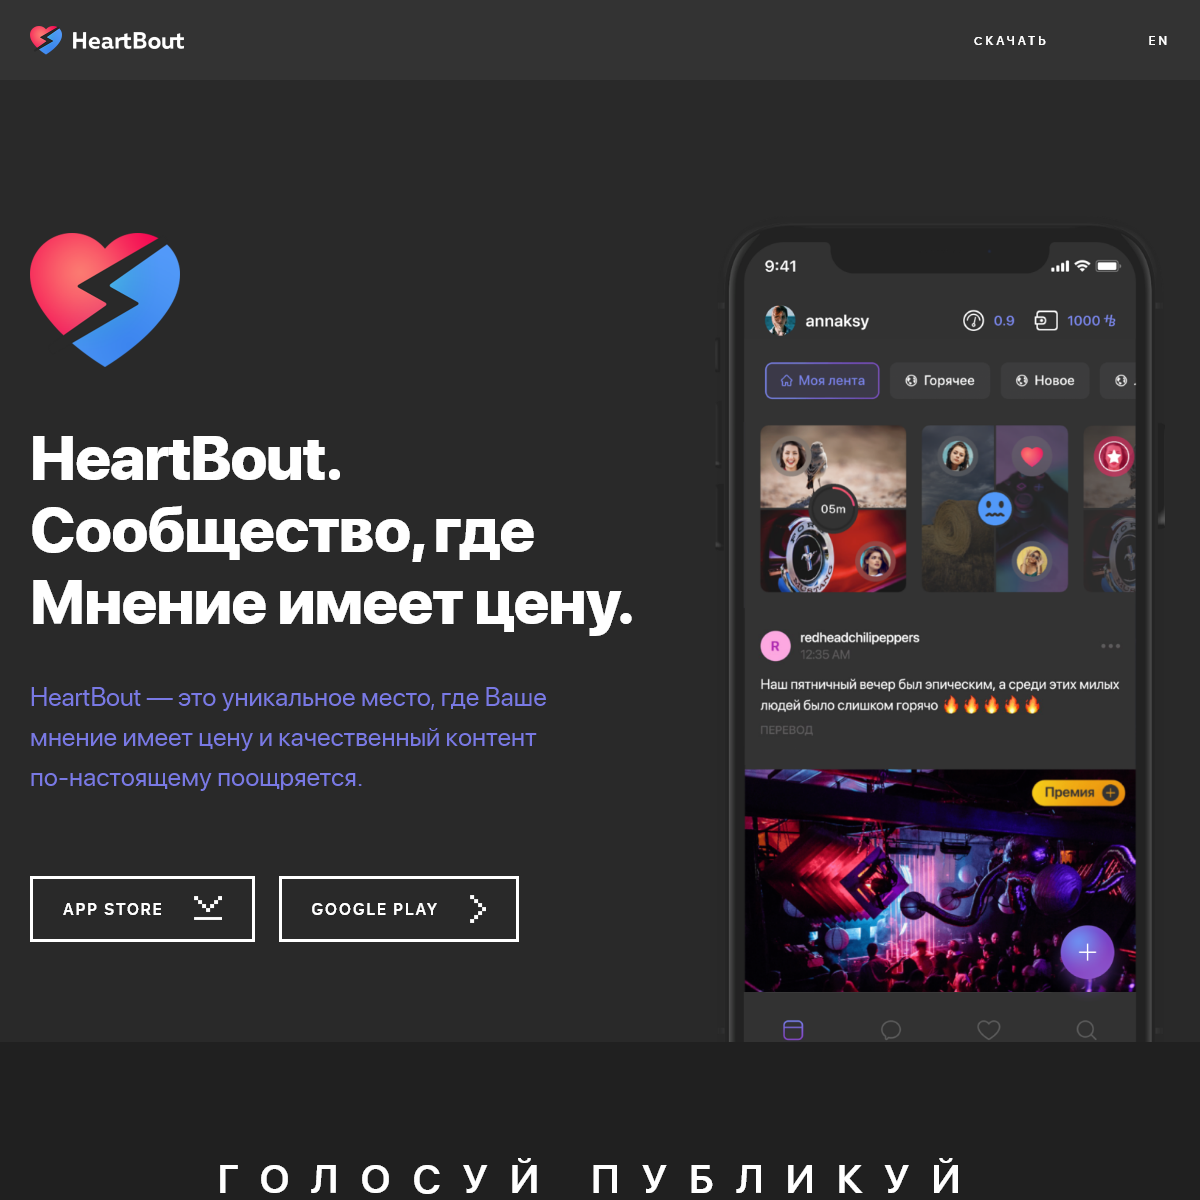 A complete backup of heartbout.com